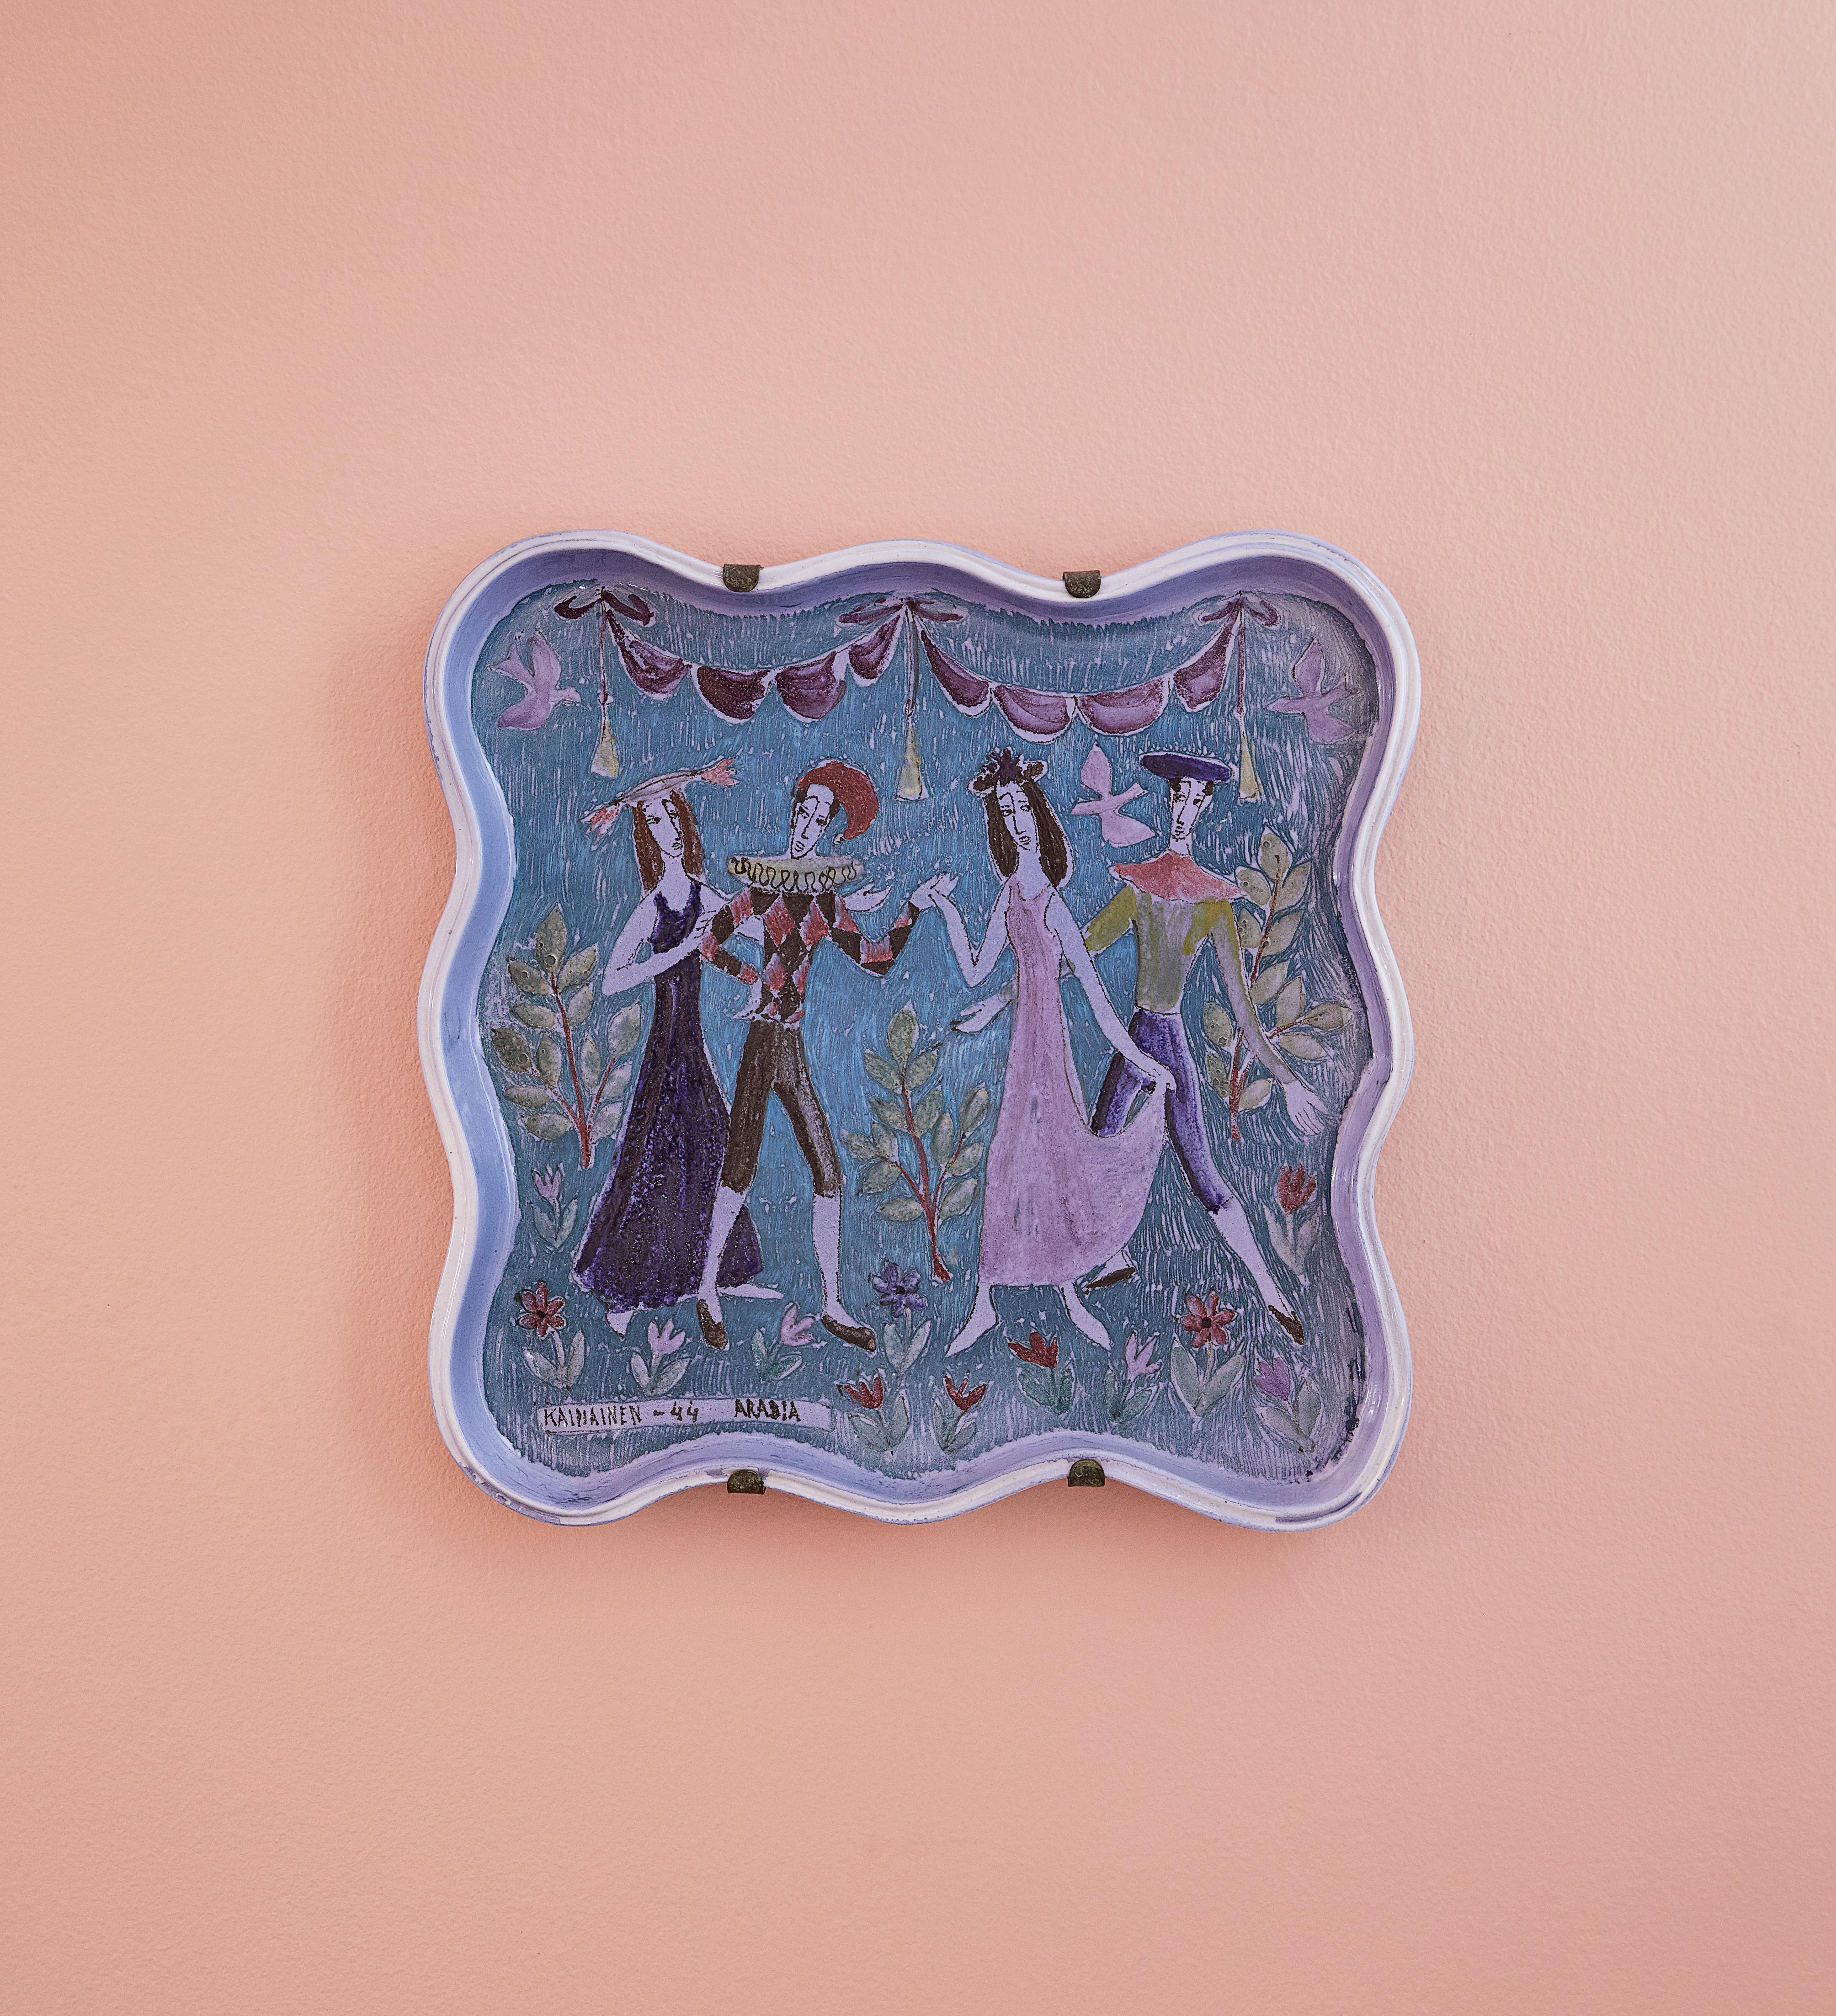 Ceramic hanging platter with decoration on blue fund.

Birger Johannes Kaipiainen (1915-88) graduated from the Central School of Arts & Crafts of Helsinki and worked for Finnish ceramics company Arabia for more than fifty years. Known as the